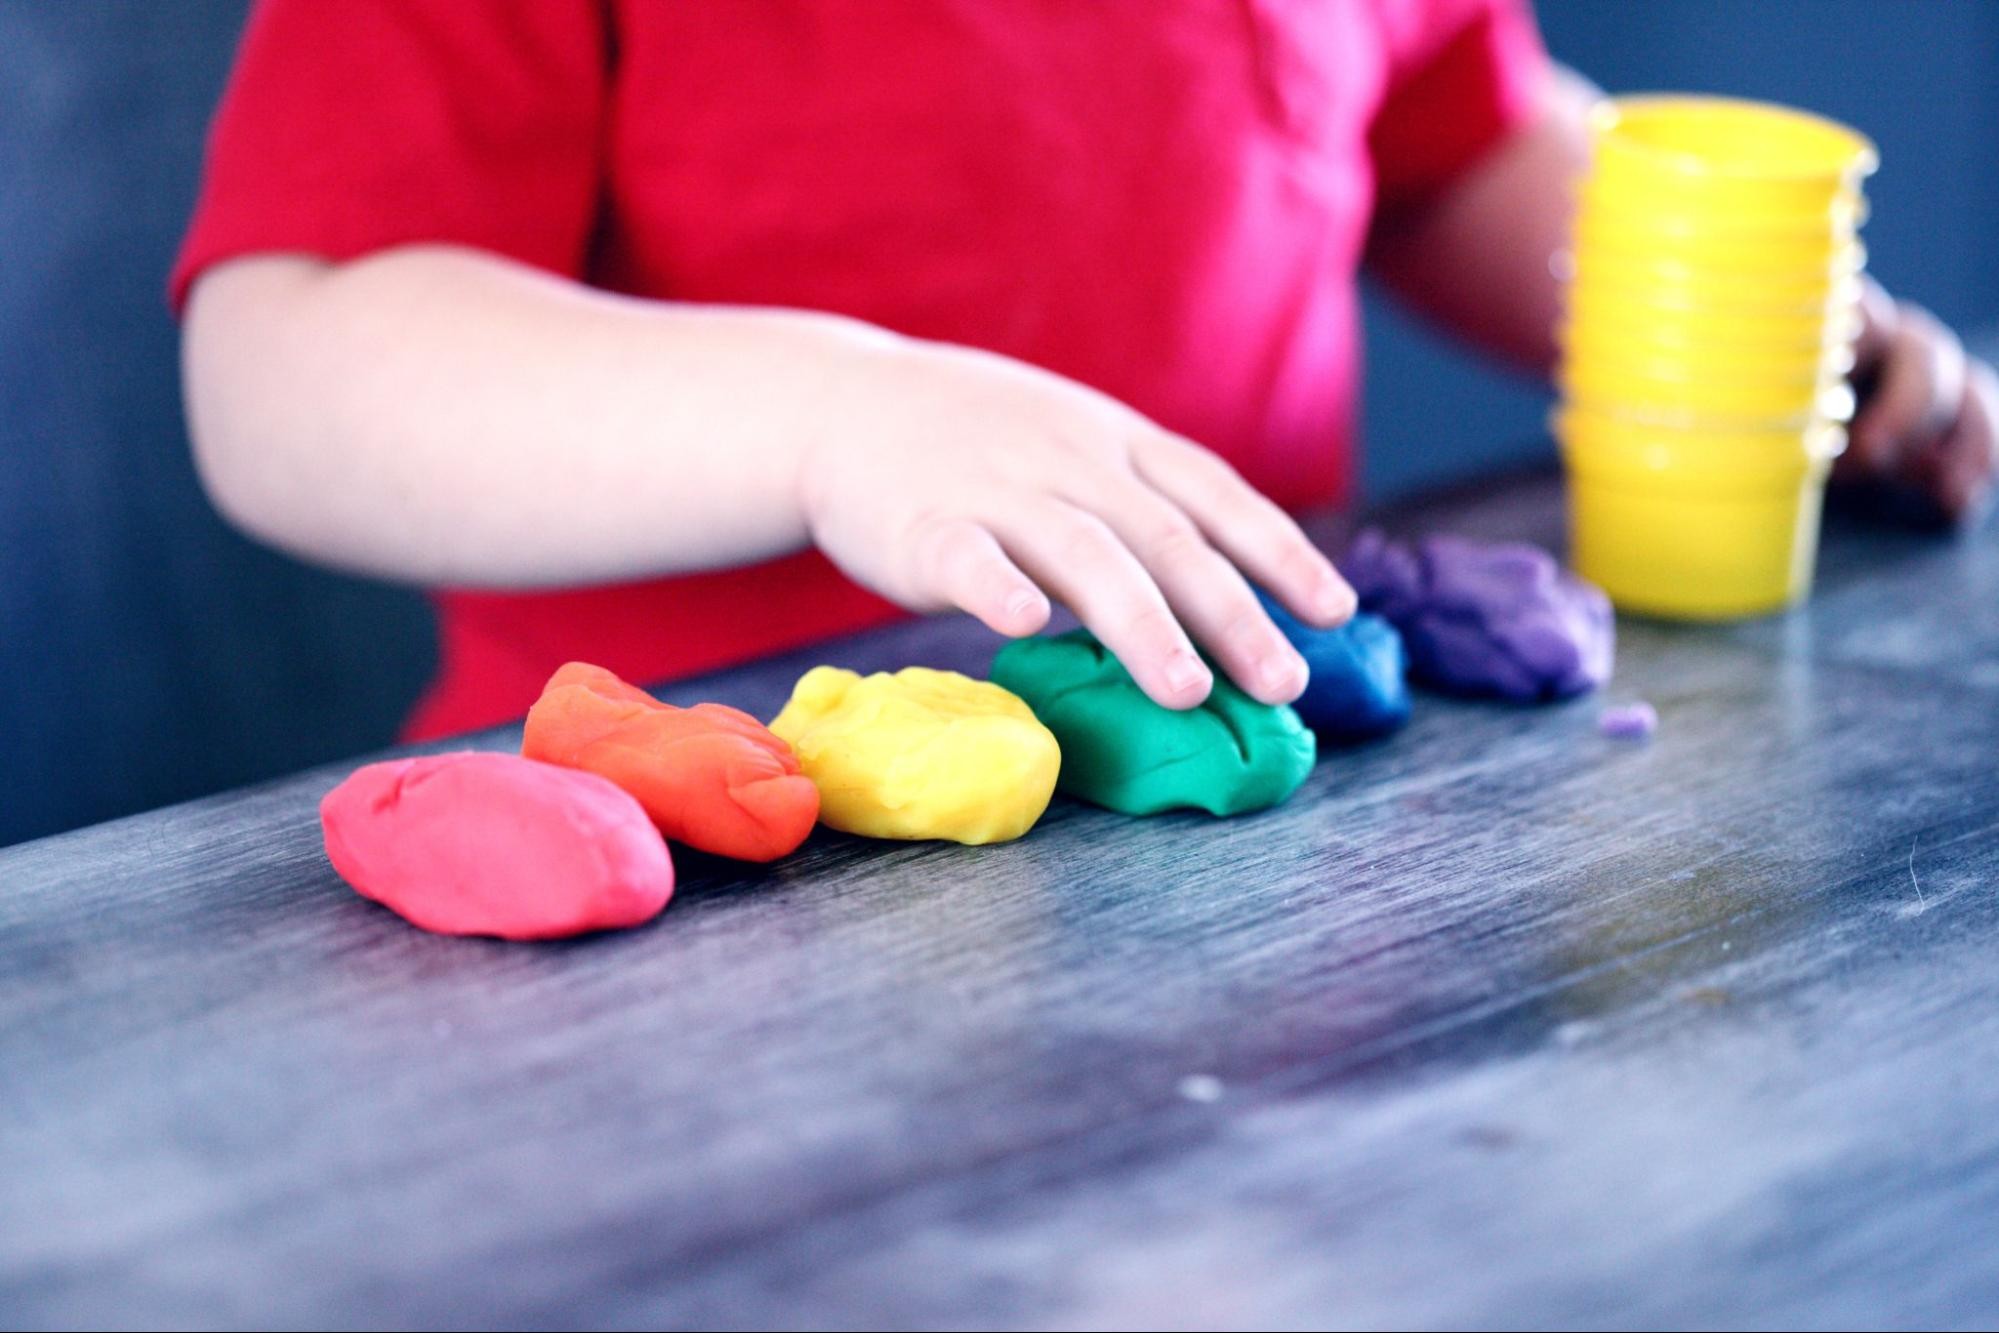 A student plays with colorful play dough.